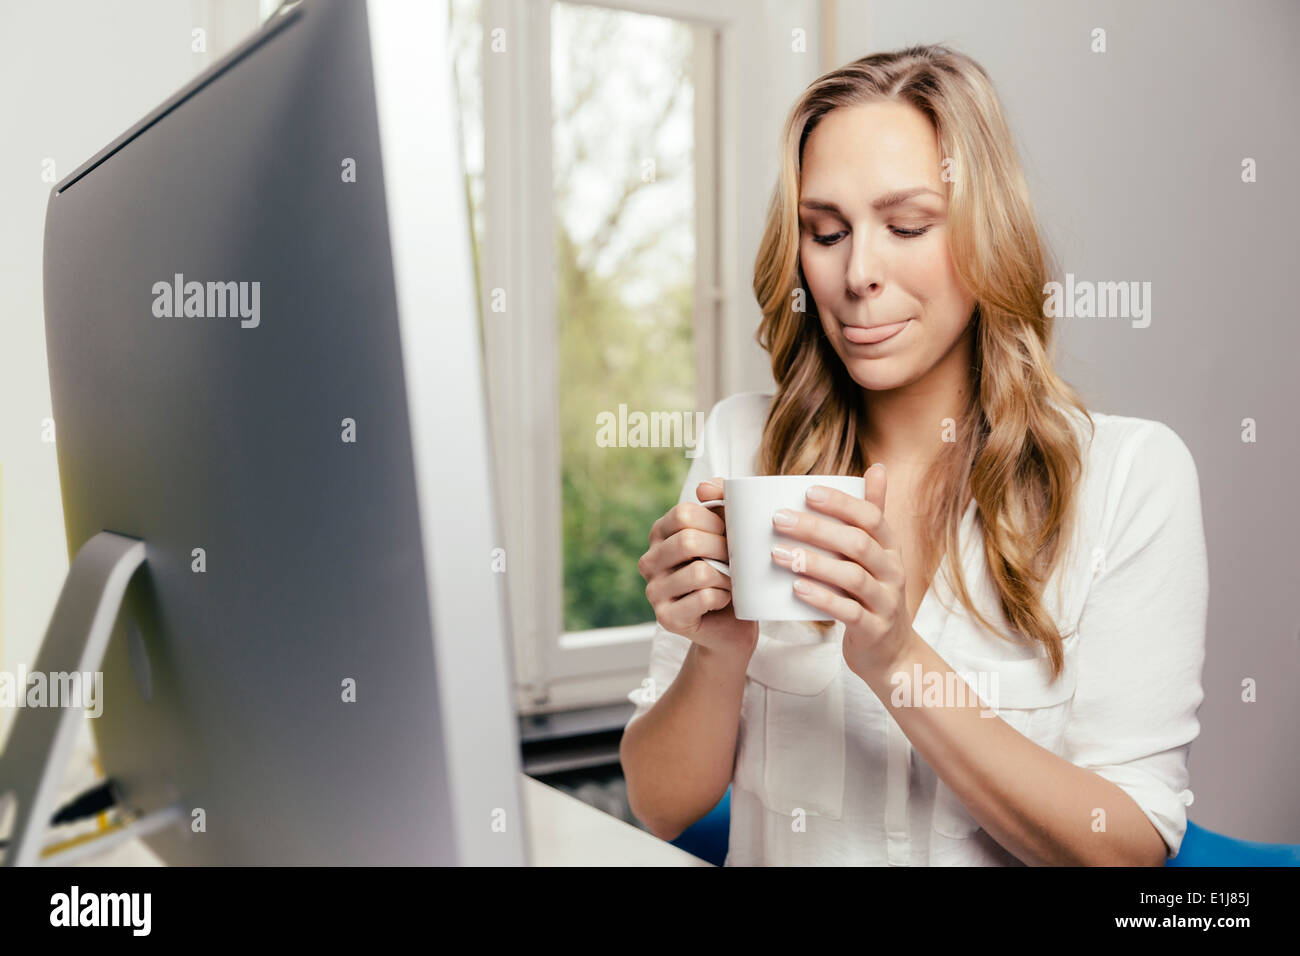 Blond young woman at desk drinking cup of coffee Stock Photo